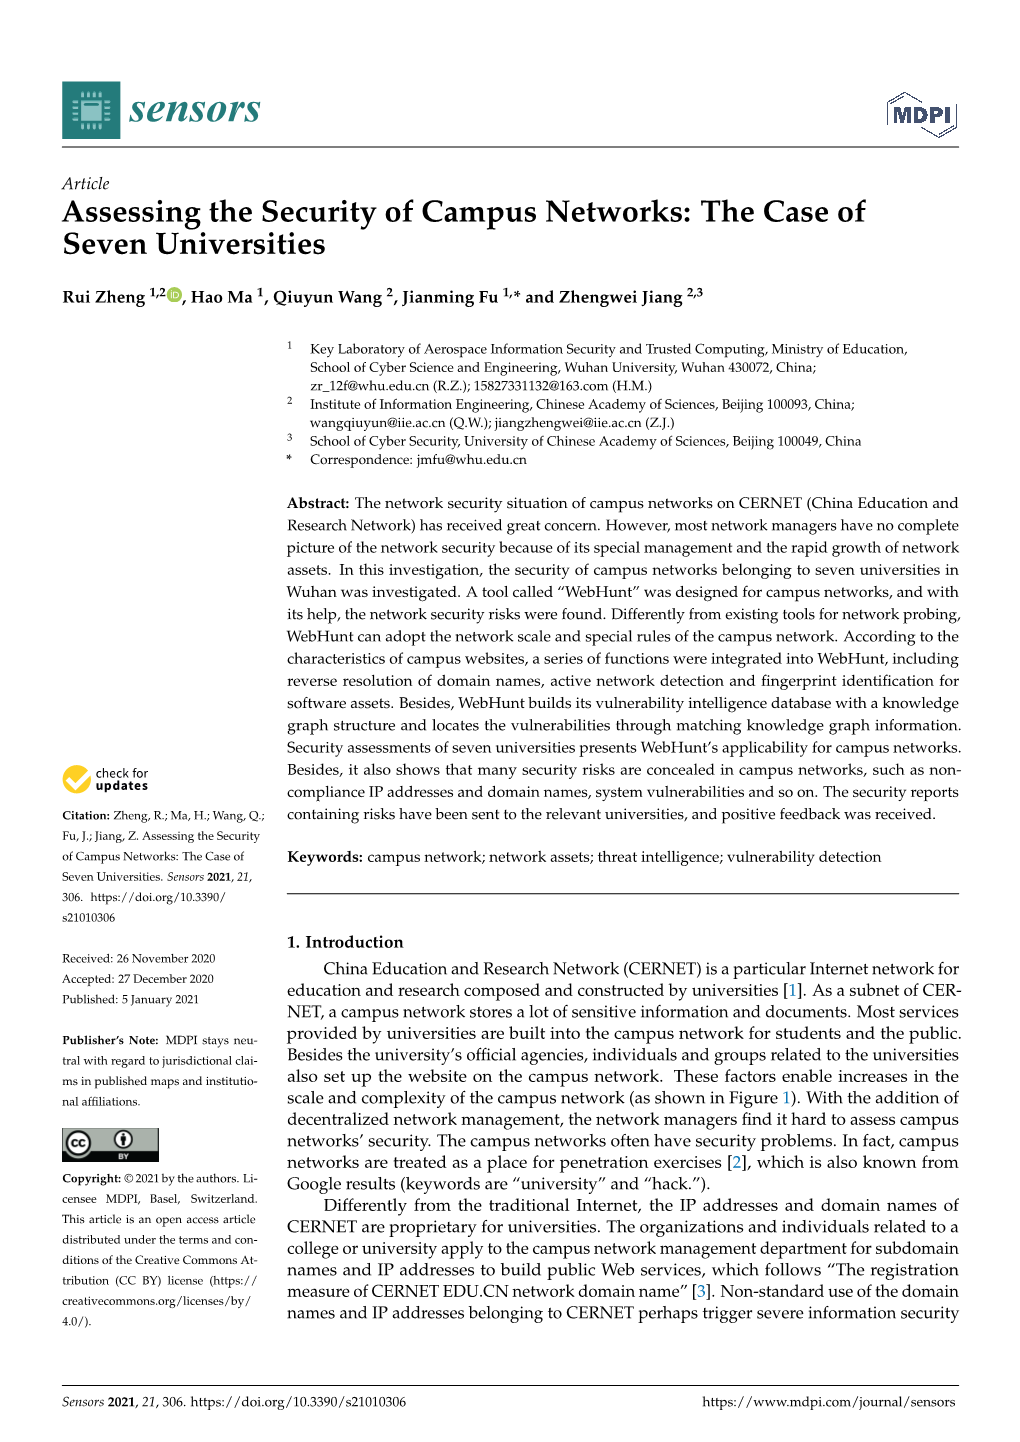 Assessing the Security of Campus Networks: the Case of Seven Universities